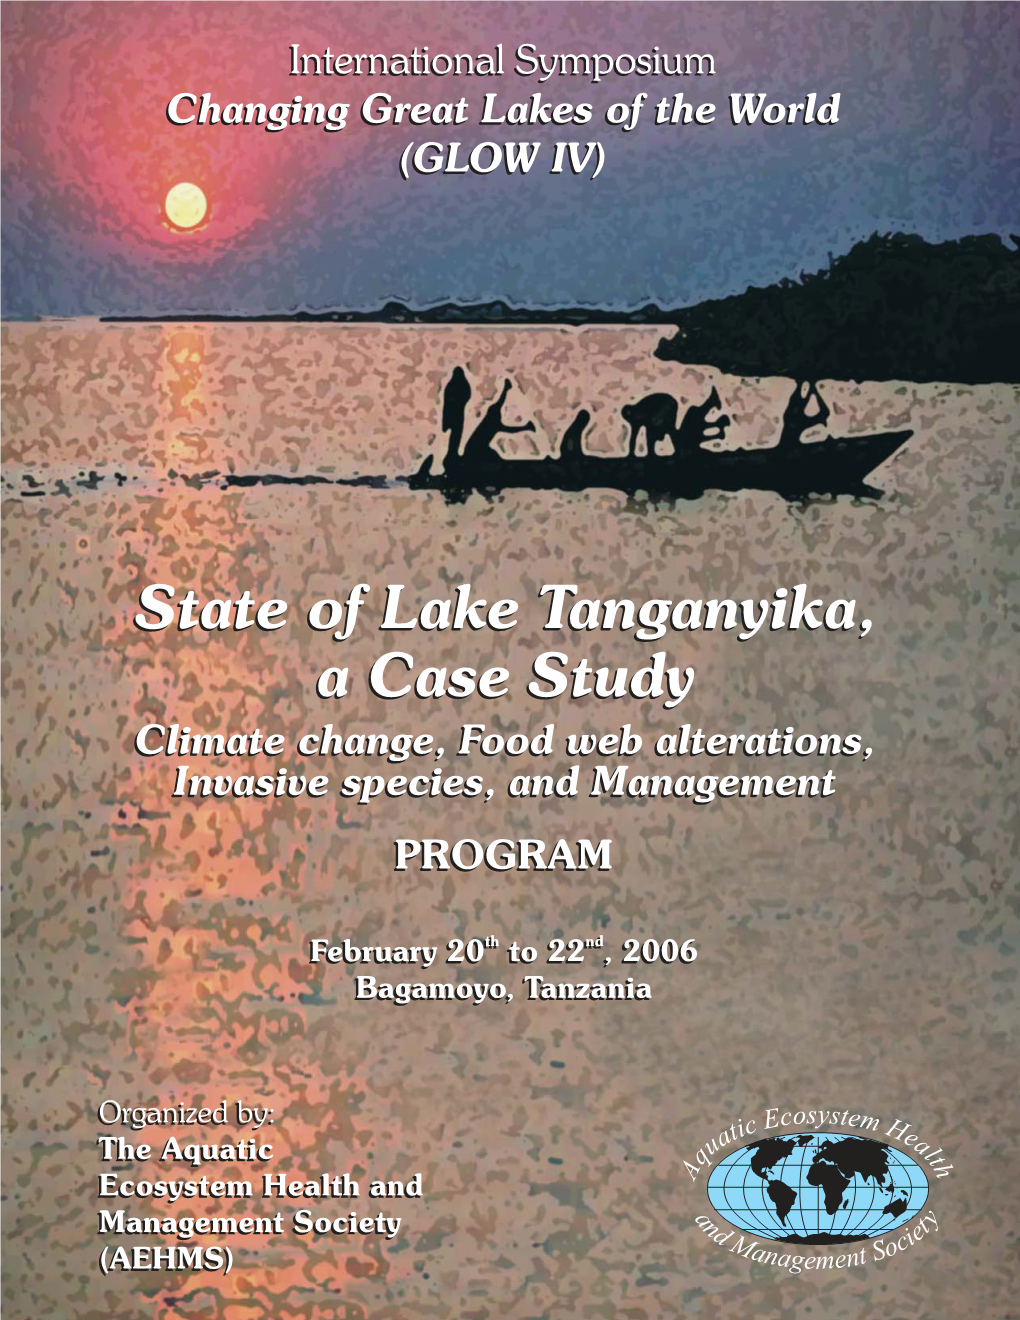 GLOW IV: State of Lake Tanganyika, a Case Study: Climate Change, Food Web Alterations, Invasive Species